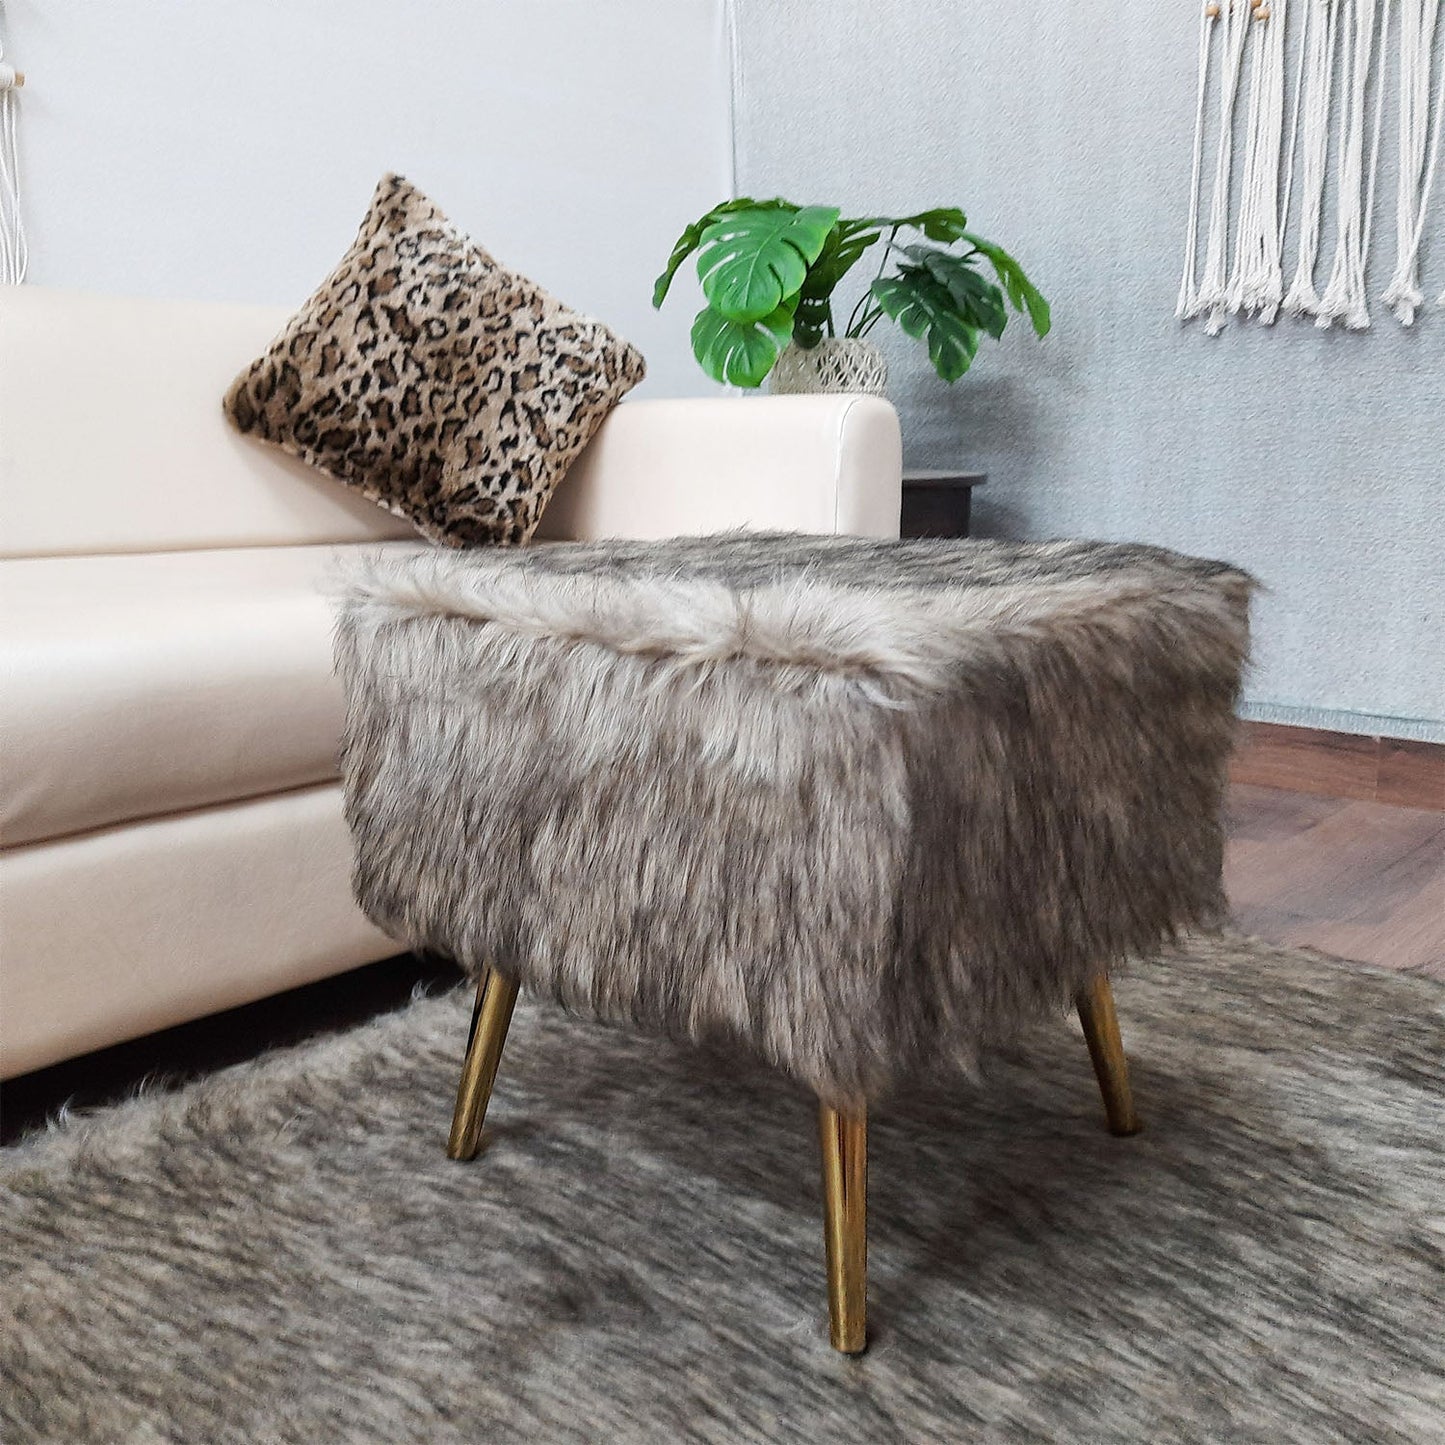 Noviato Collection – Shades of Grey/Brown Premium Long Faux Fur Footstool Gold Metal Legs Modern On-Trend Style Square Multi-Functional Ottoman Stool Seat, 40 cm Tall | from Avioni